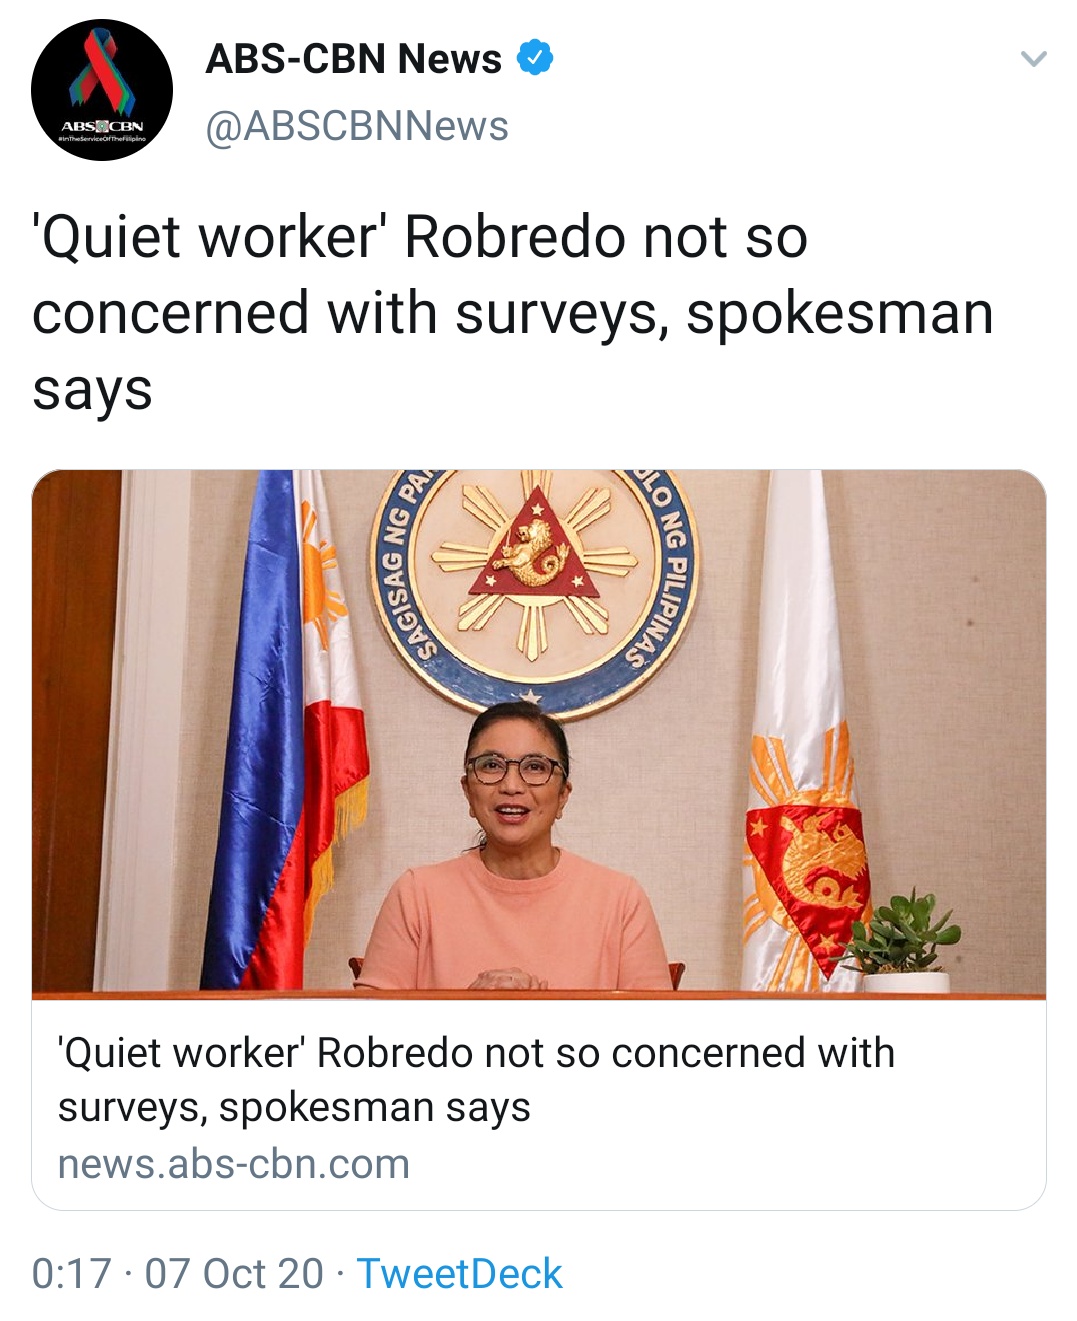 'Quiet worker' Robredo not so concerned with surveys, spokesman says